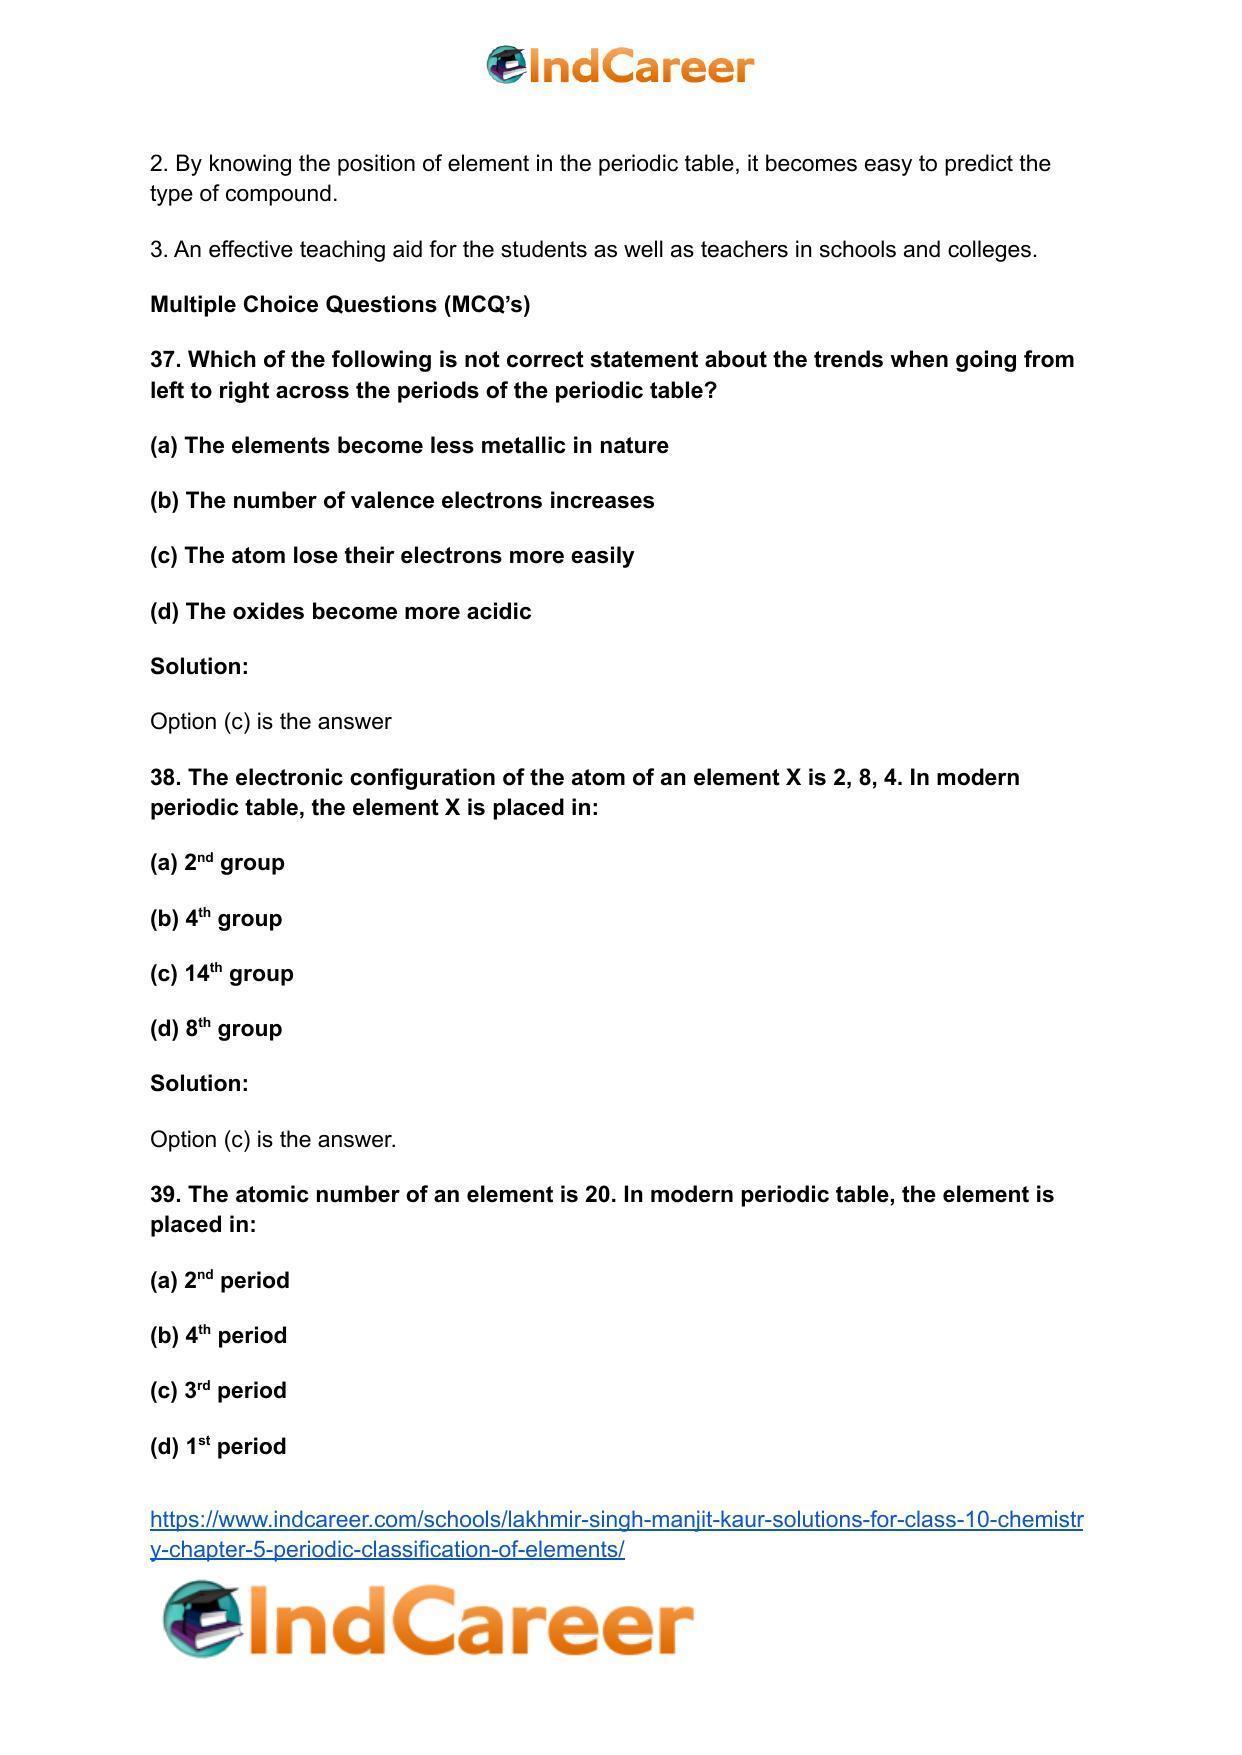 Lakhmir Singh Manjit Kaur  Solutions for Class 10 Chemistry: Chapter 5- Periodic Classification Of Elements - Page 30